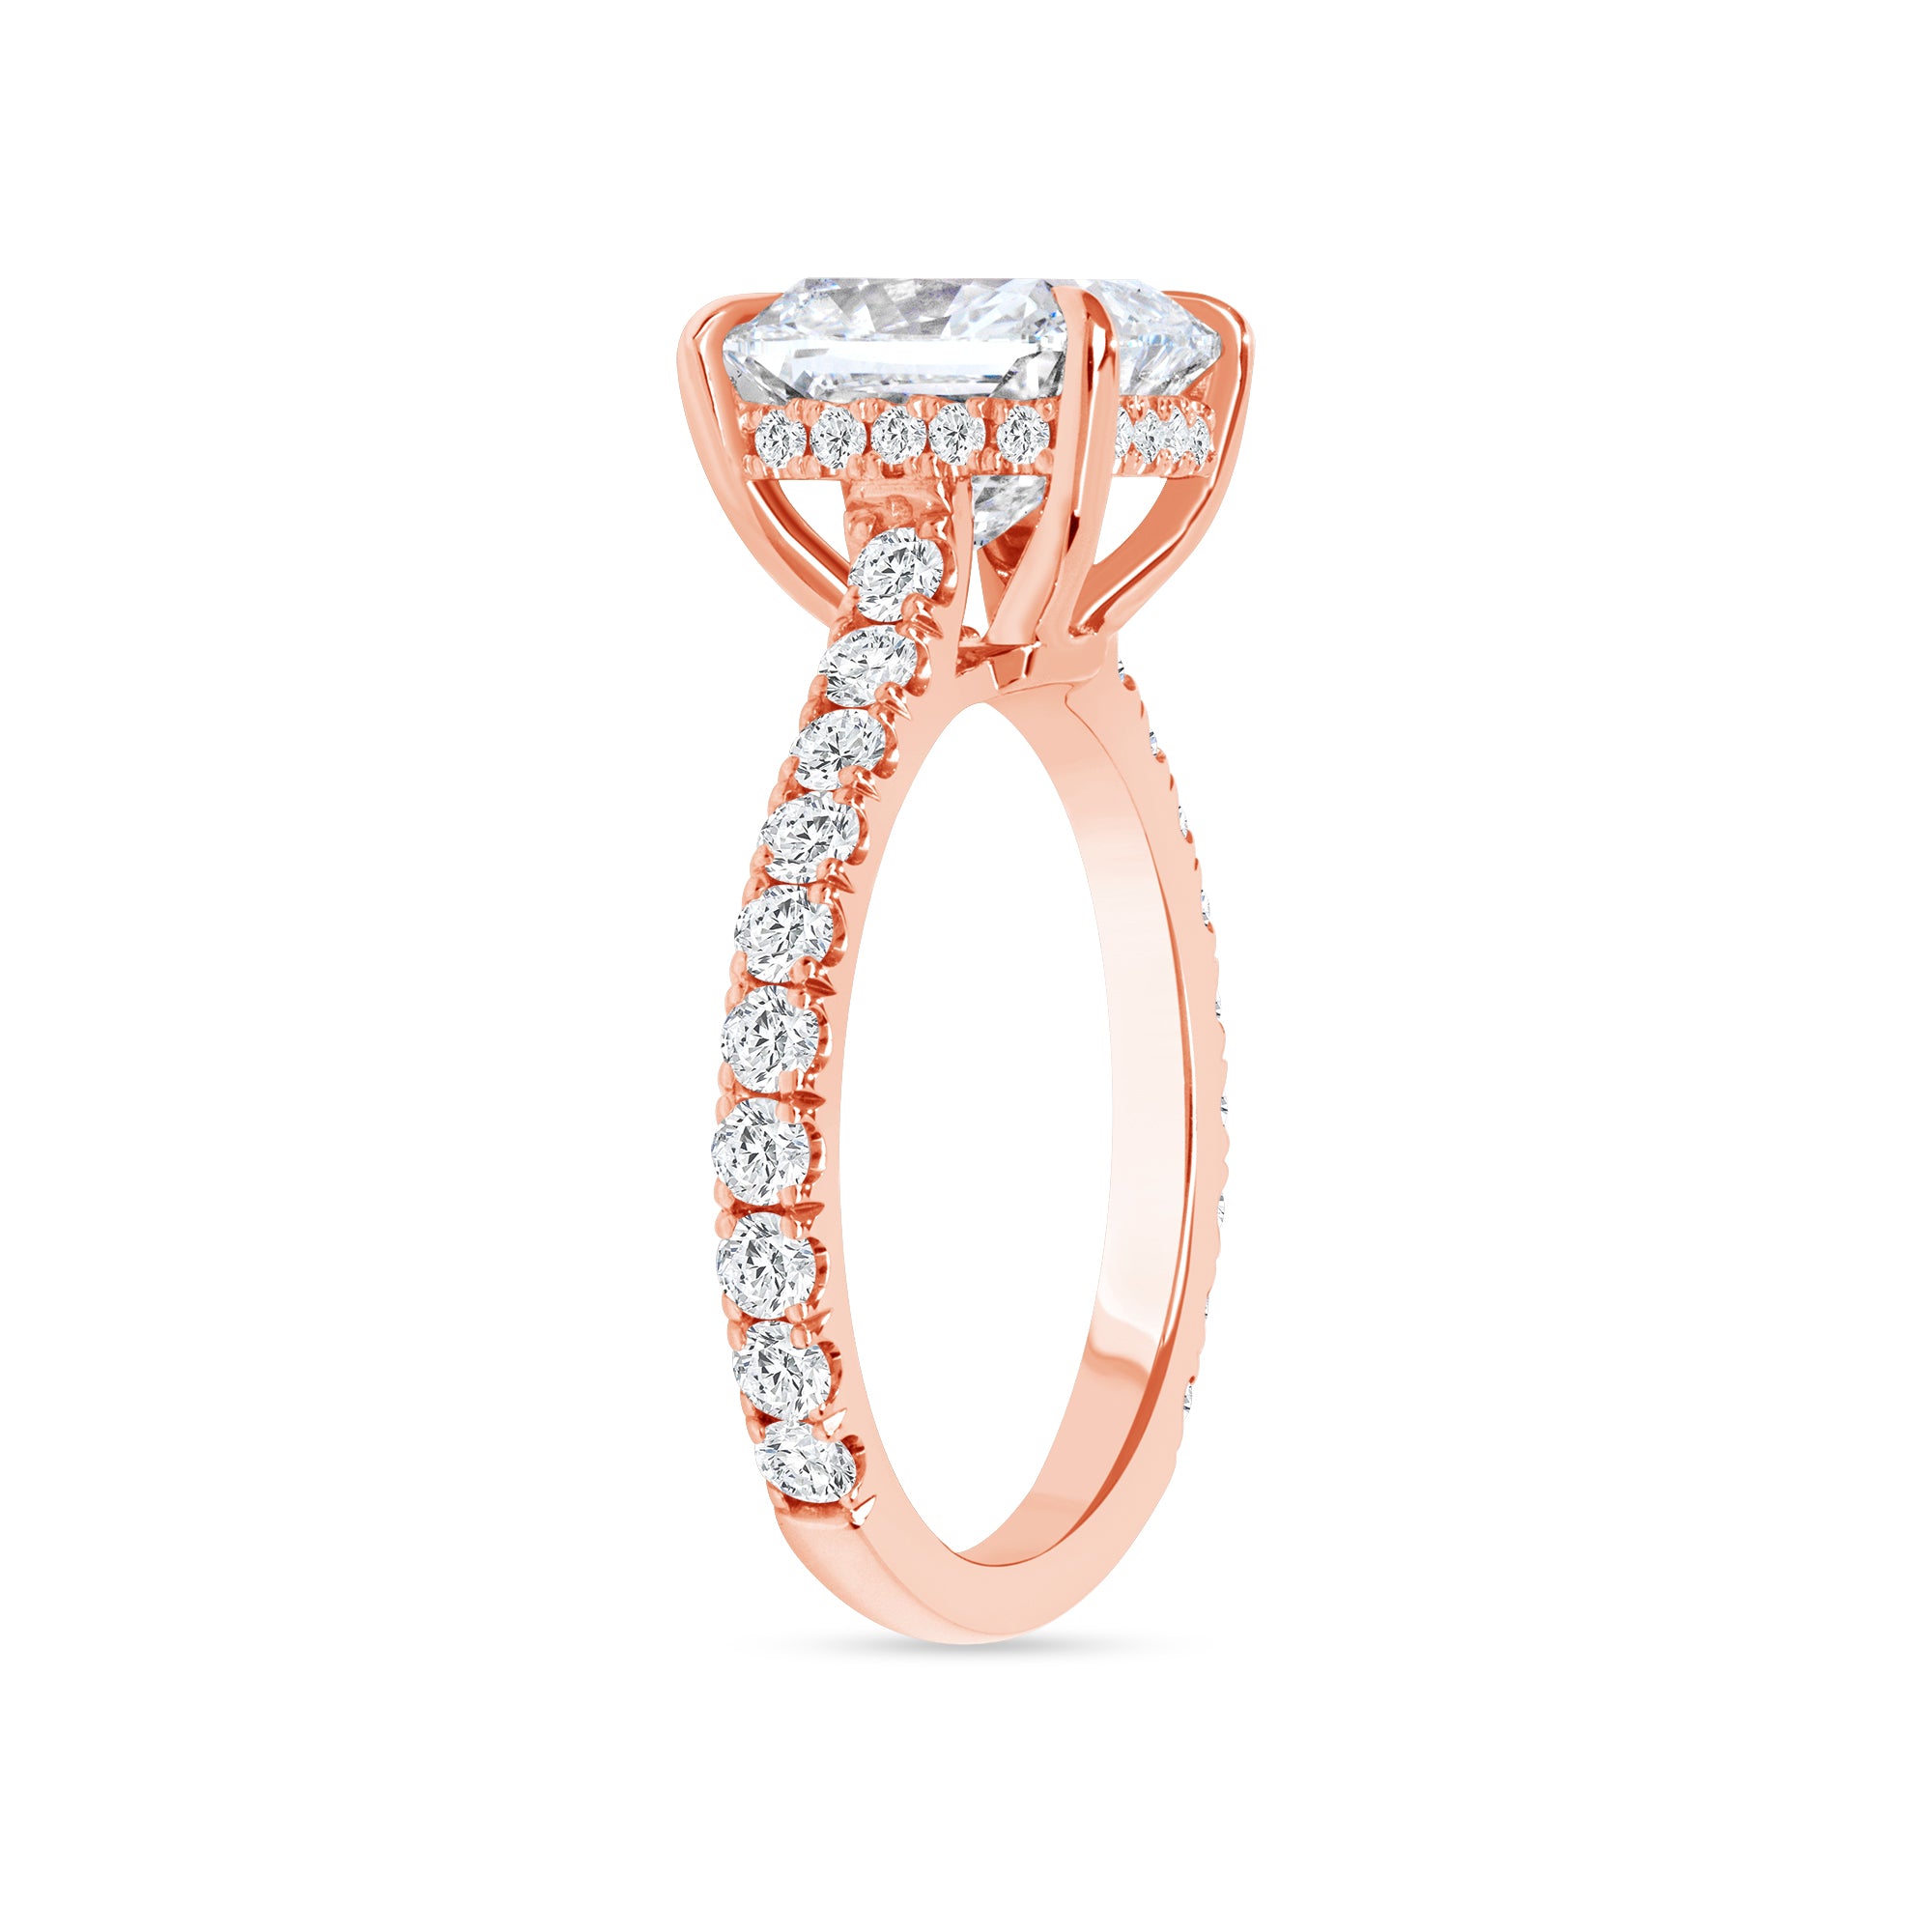 2.22ct Cushion Cut Diamond Engagement Ring in 14k Rose Gold Band, GIA Certified